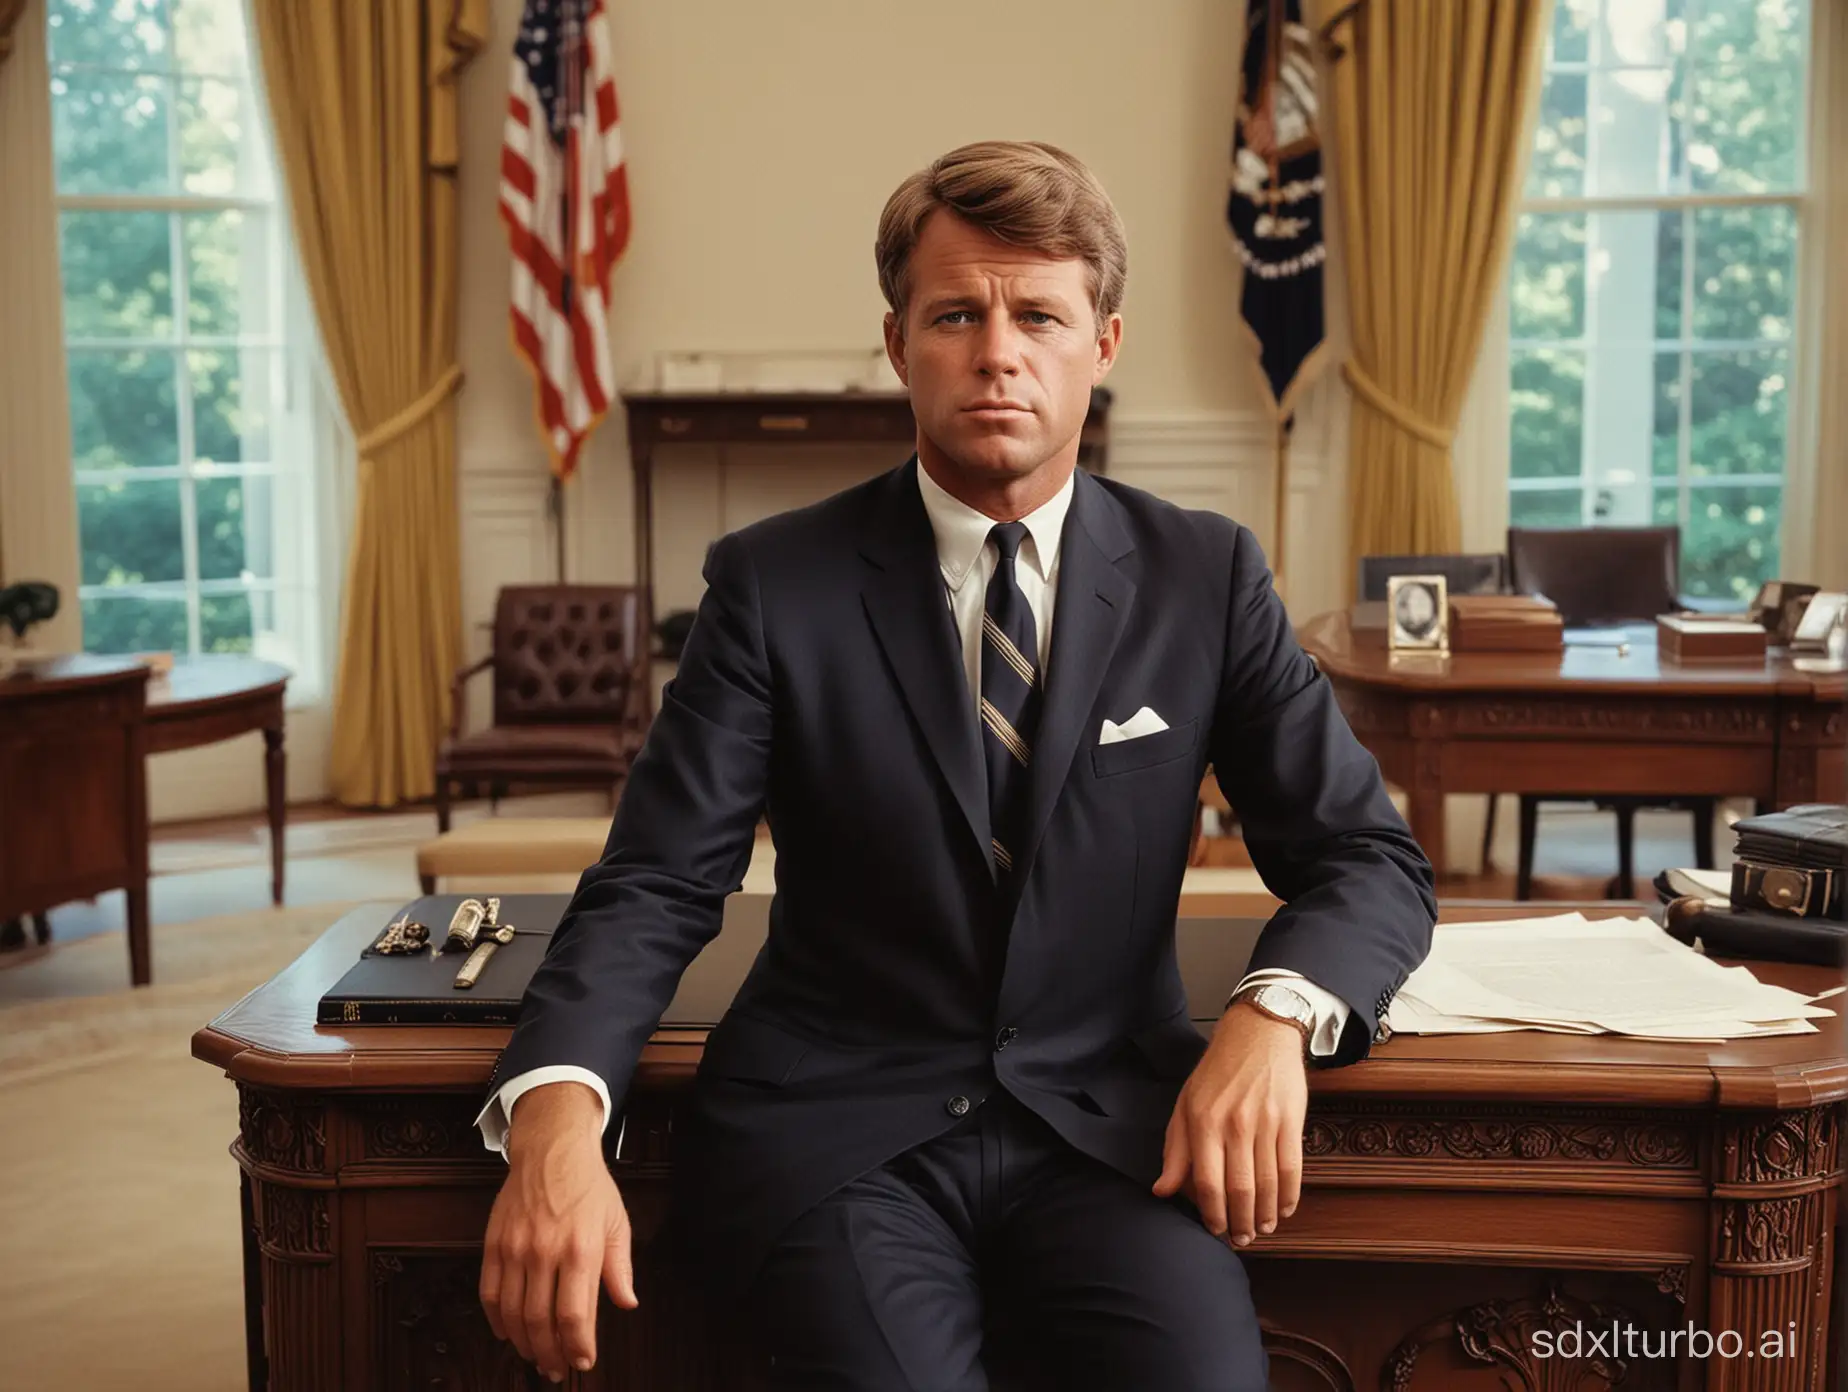 Robert F Kennedy in a fine 1960s era suit sitting as president an photo extremely photo realistic rendering is sitting in the Whitehouse Oval office of the whitehouse.